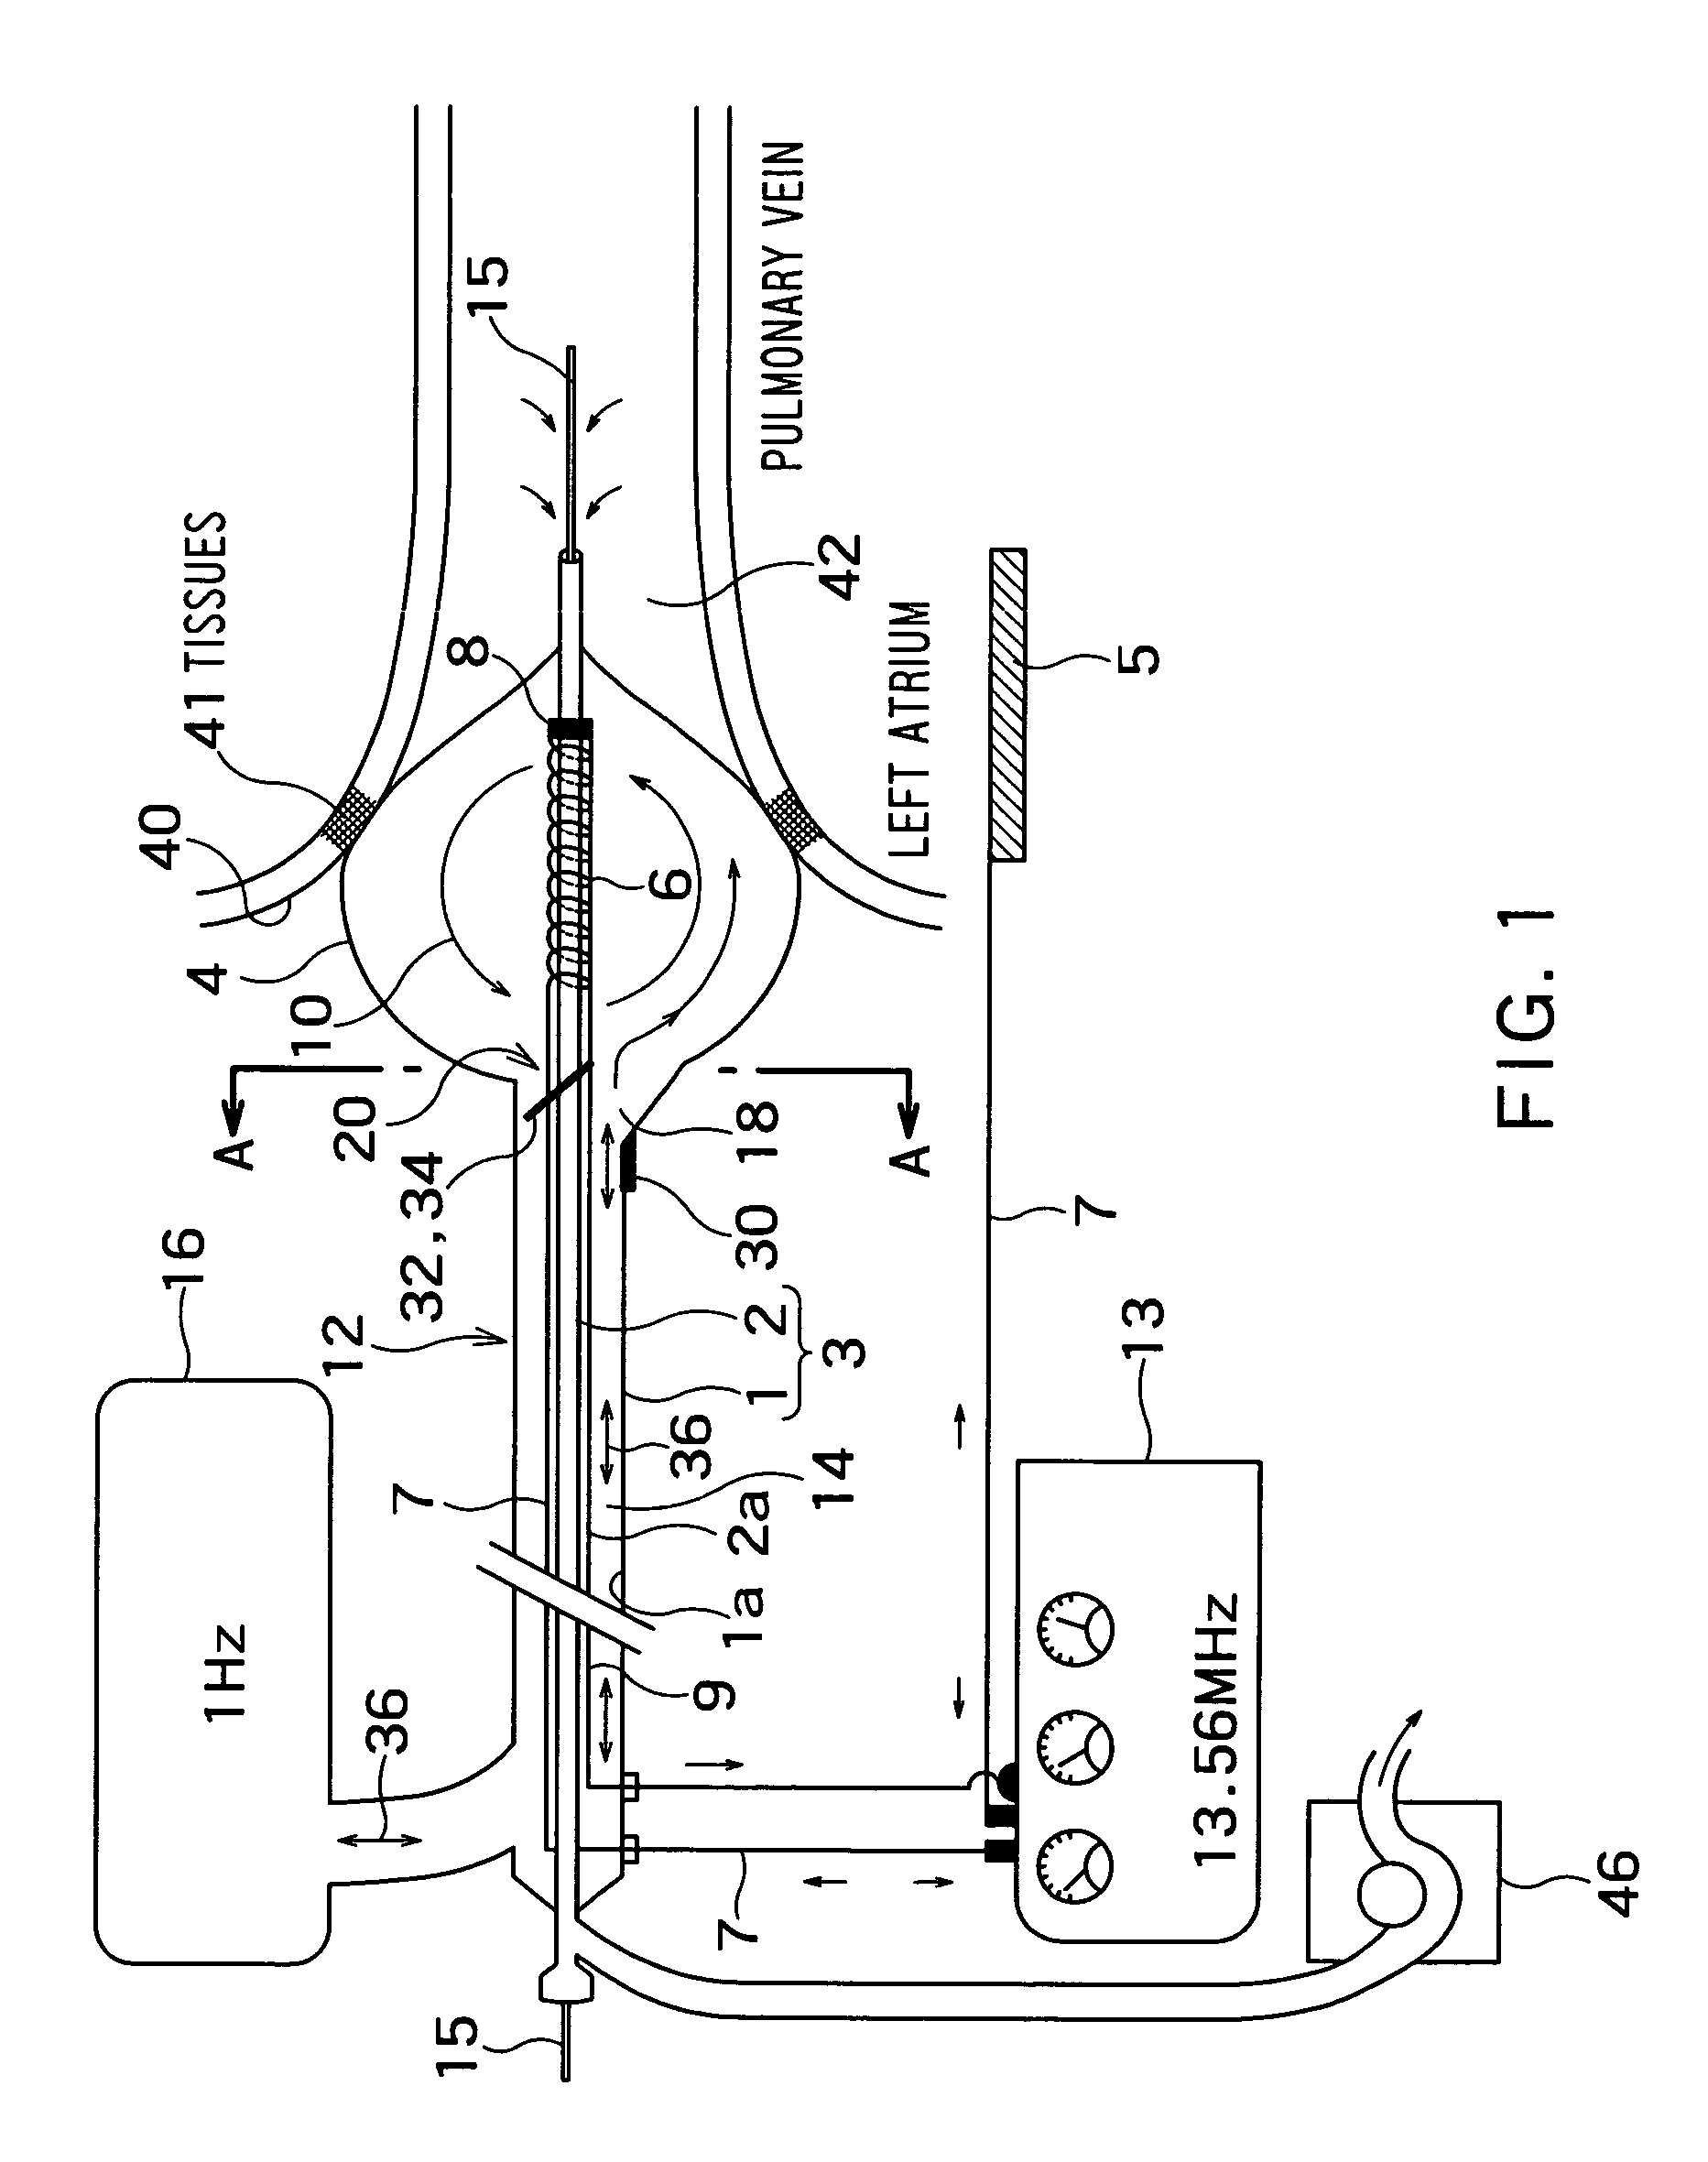 Radio-frequency thermal balloon catheter